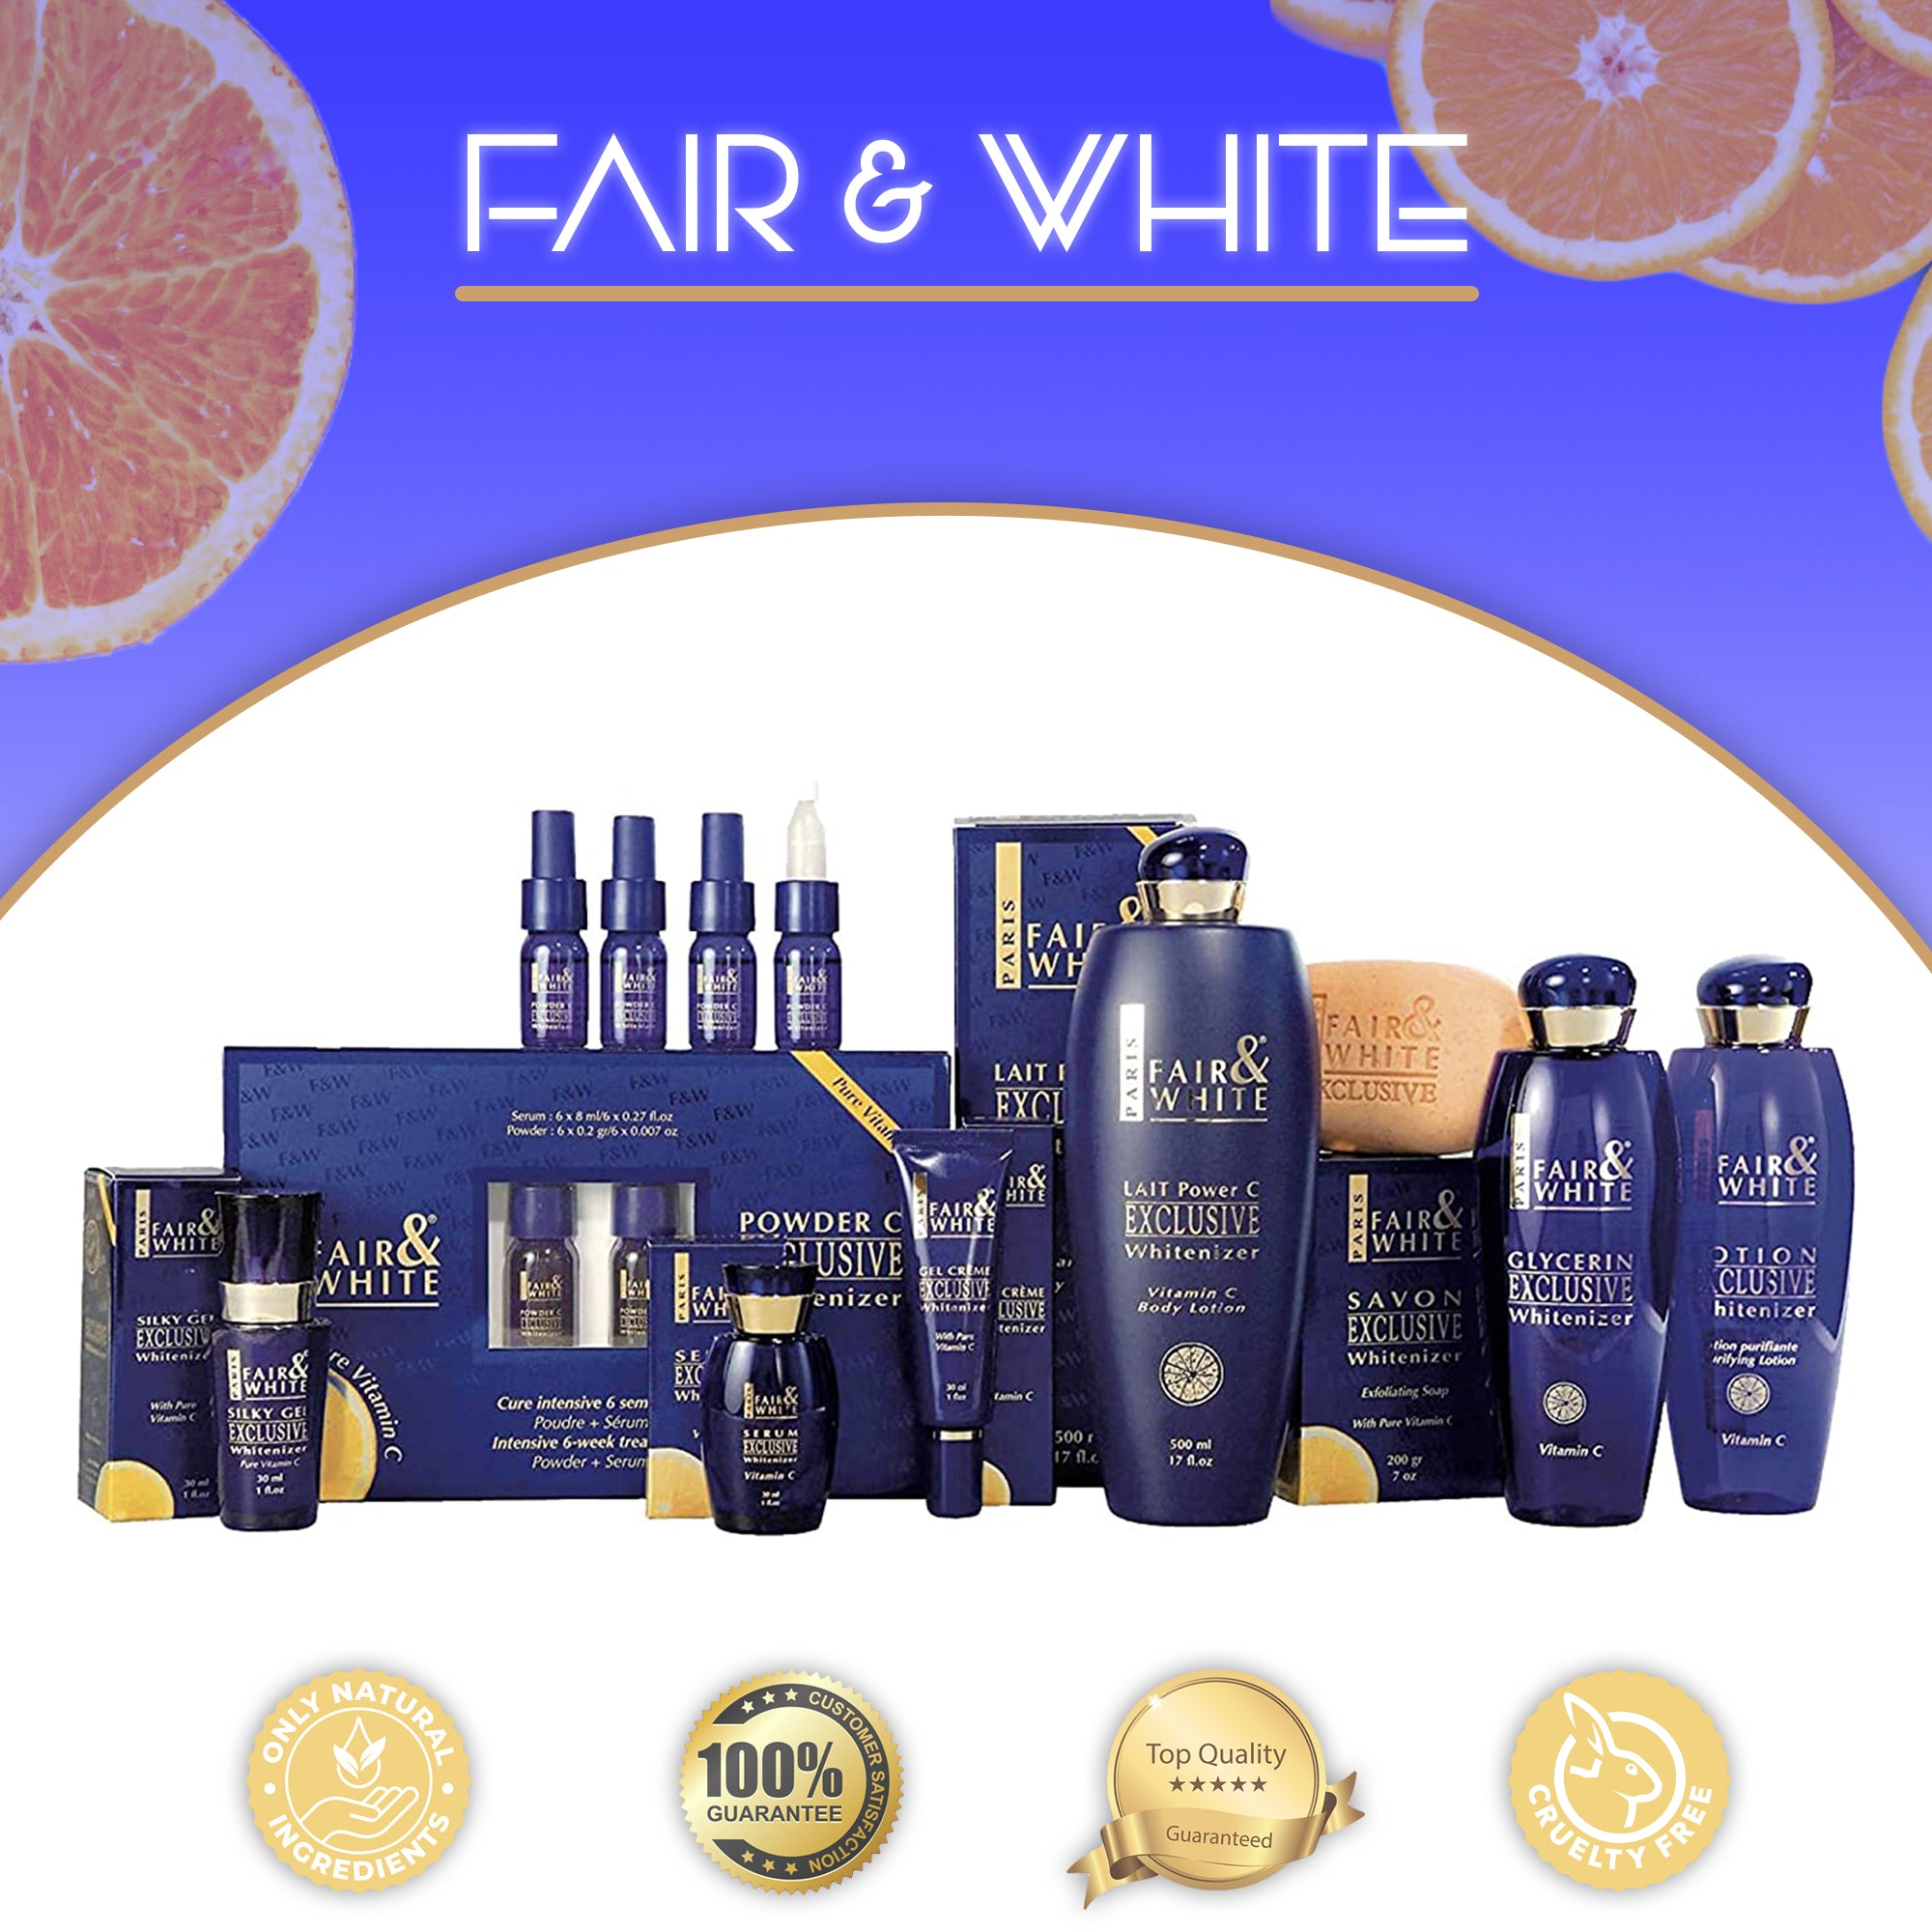 Fair and White Exclusive Soap With Pure Vitamin C 200gr